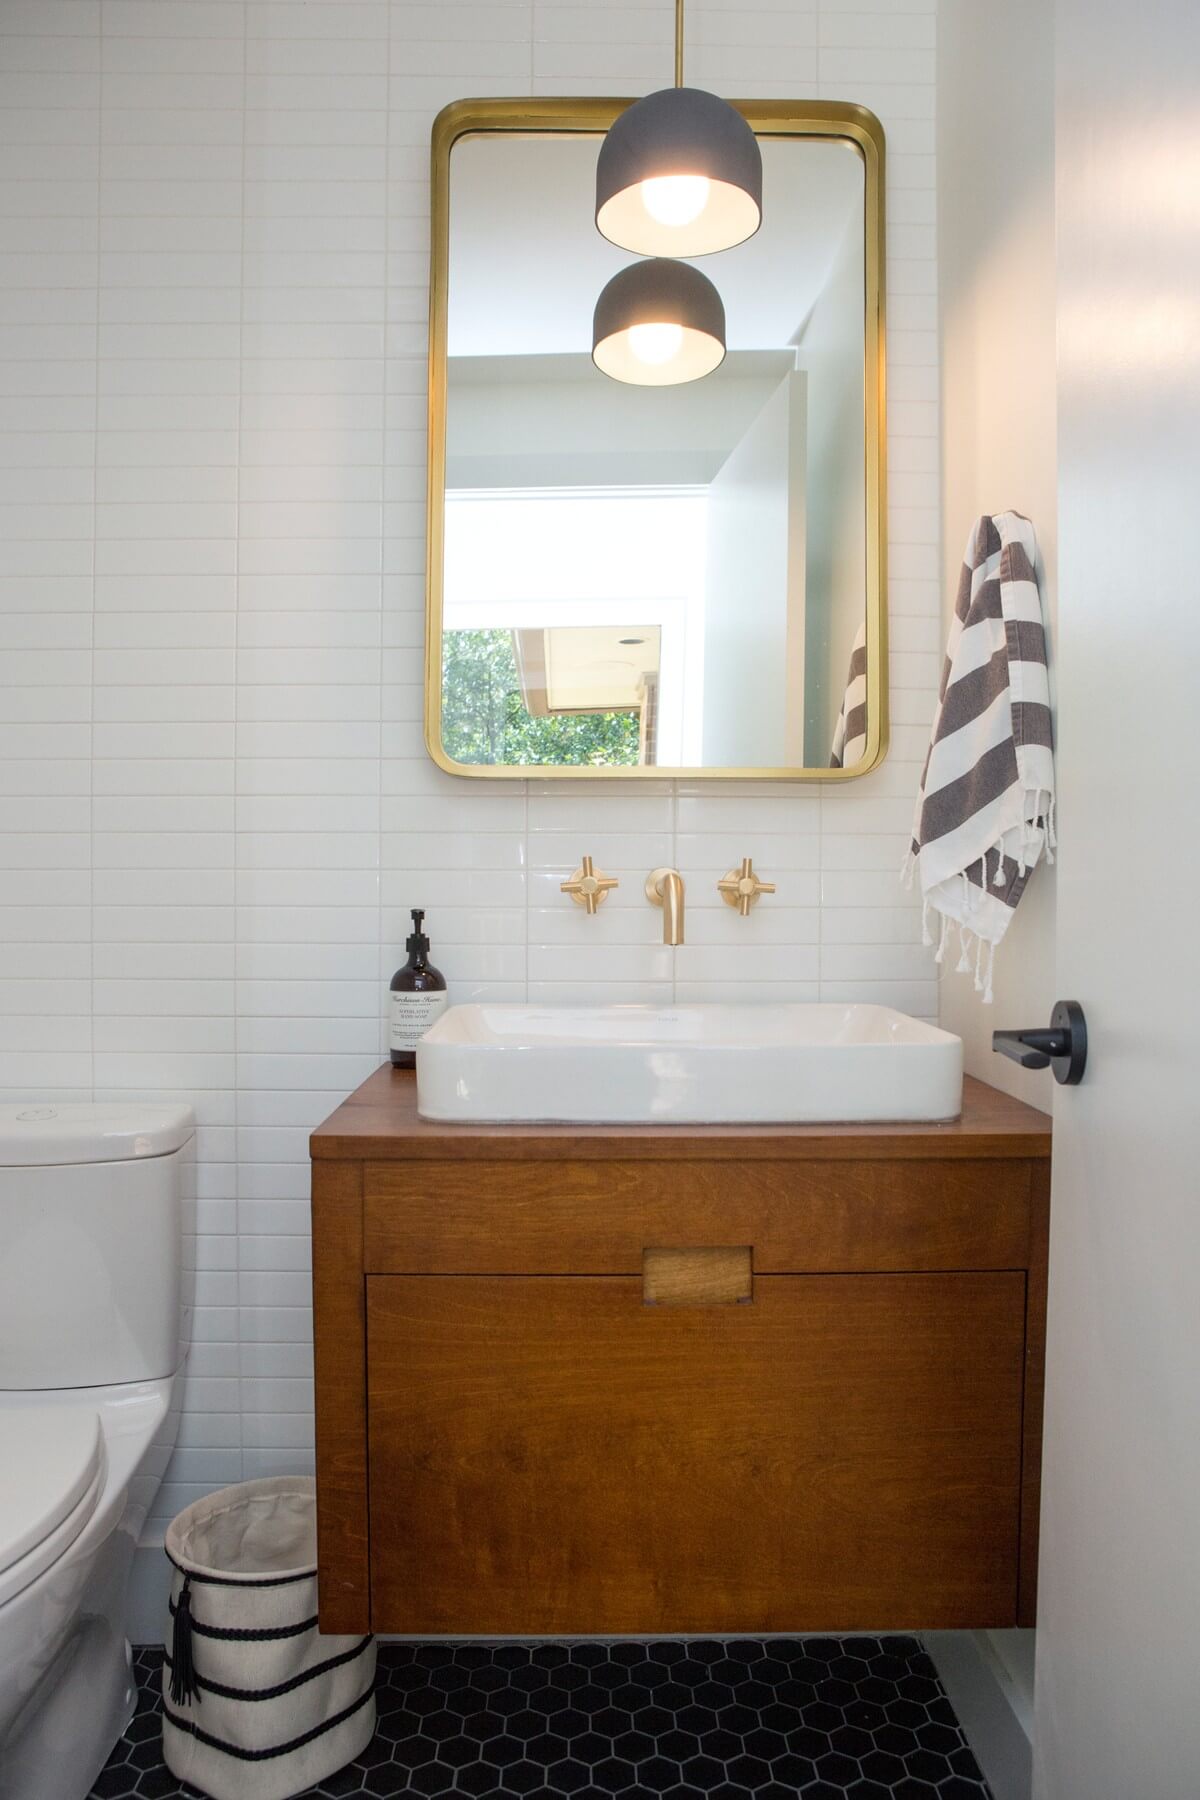 "Tile is one of my favorite hard finishes to source, and the options are limitless now. You can get really creative and it’s so much fun," says Alima. Image: Ashley Lauren Studios